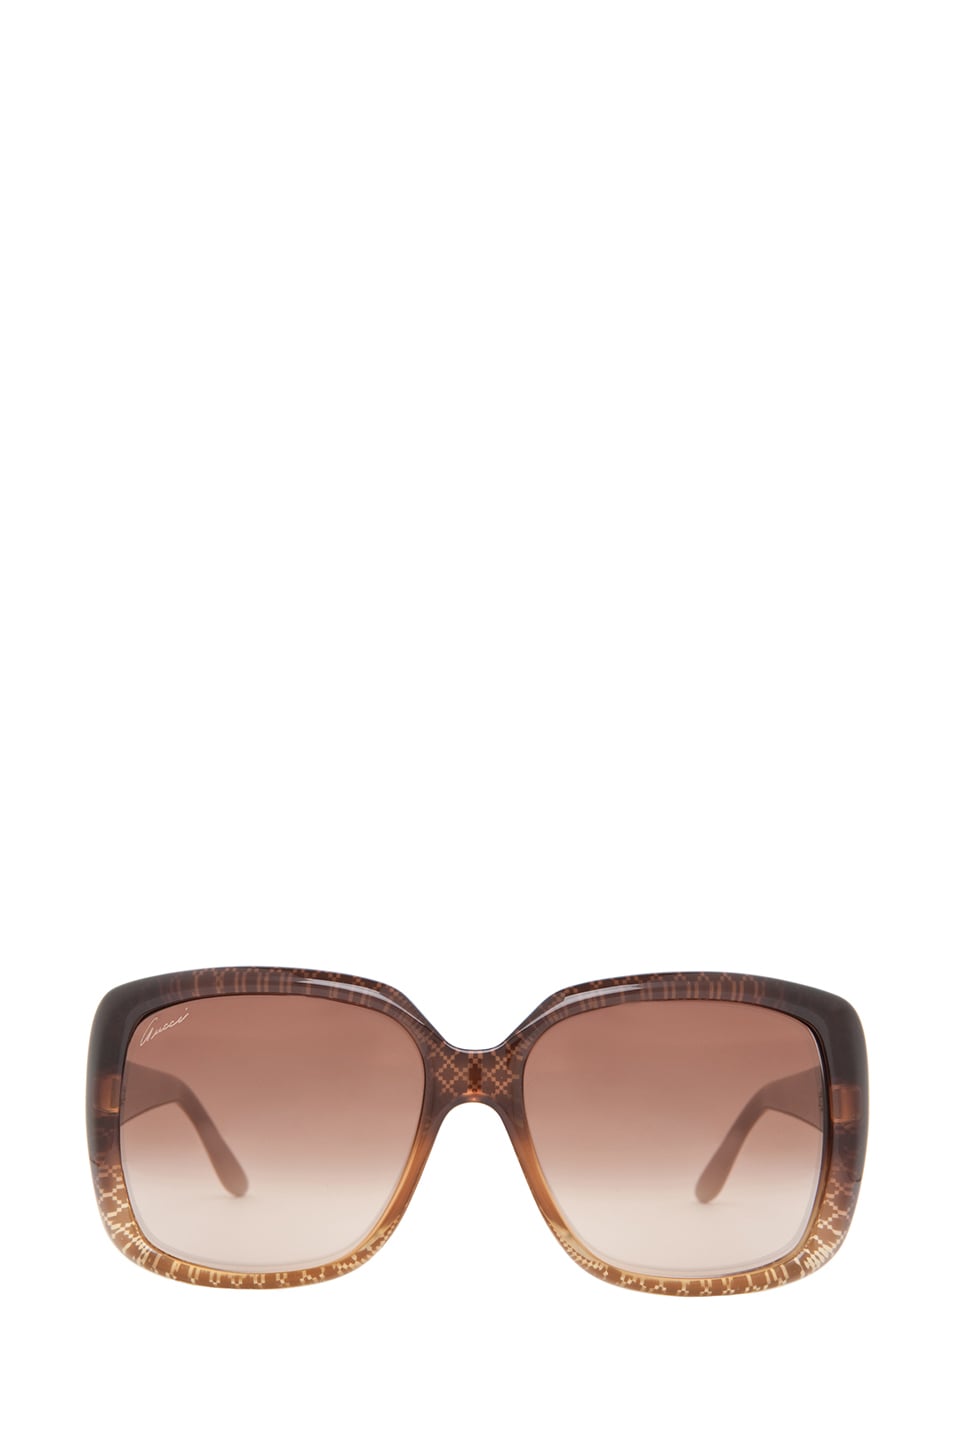 Image 1 of Gucci 3574 Sunglasses in Cuir Gold Diamond & Brown Gradient